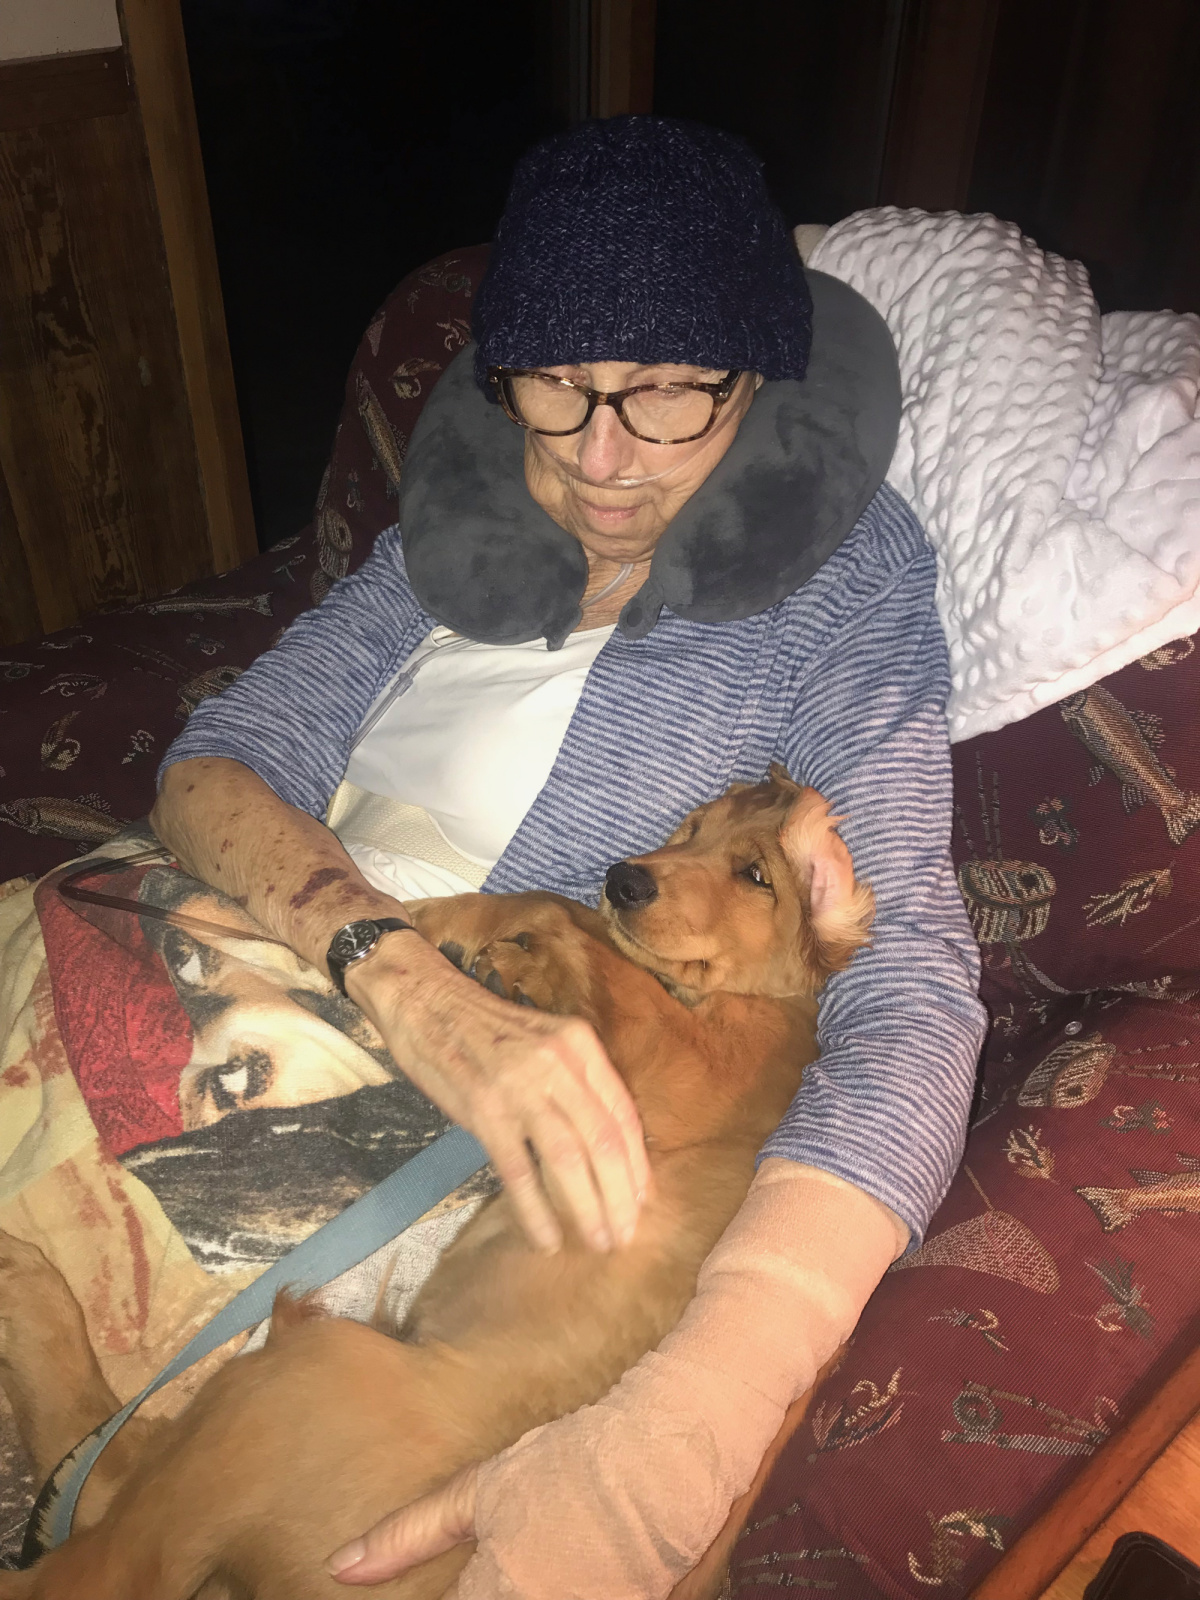 Redgie giving Grammy some love.